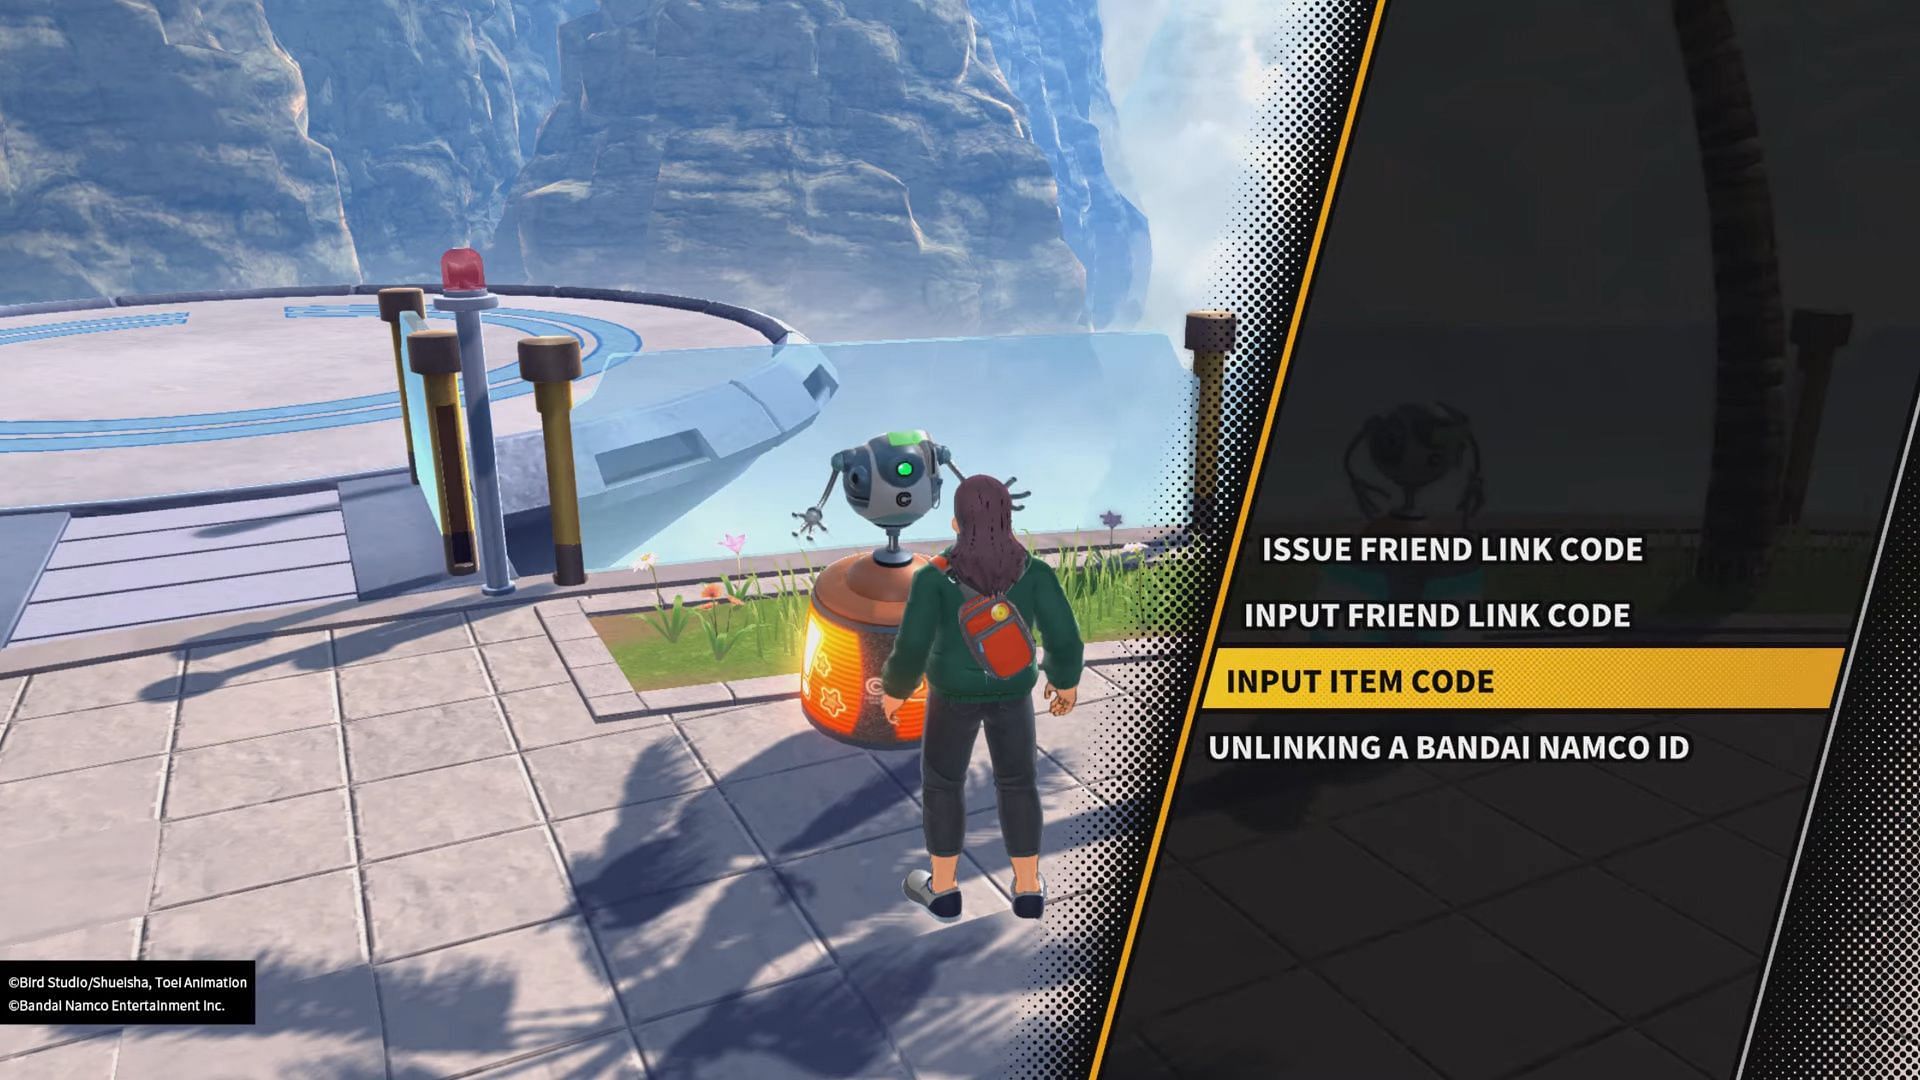 Navigate to this robot on the map to redeem codes (Image via YouTube: dbxclips)